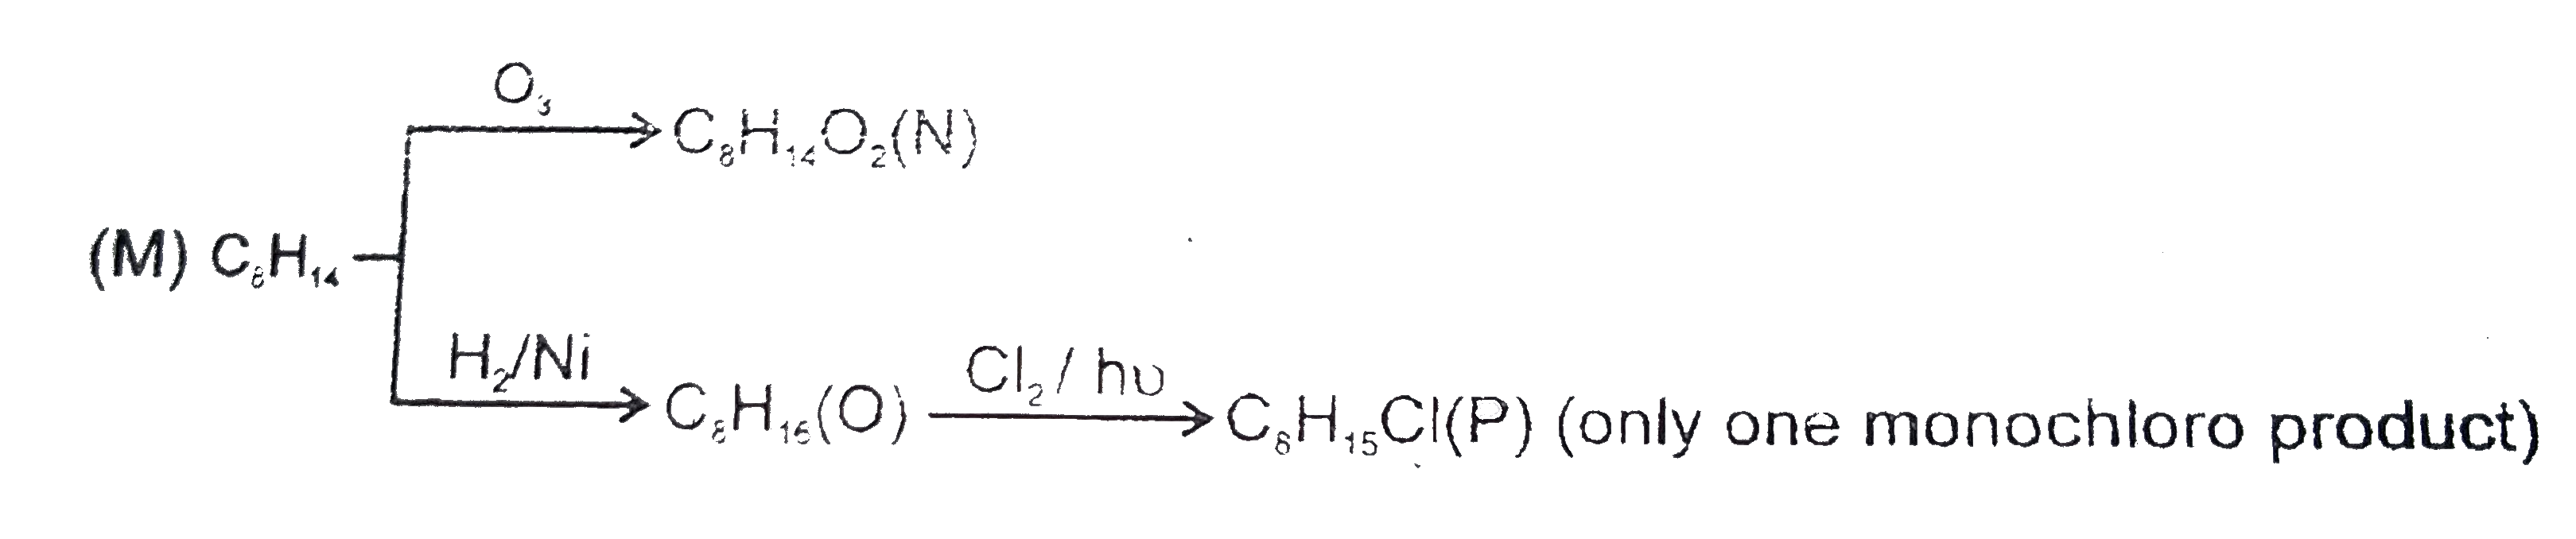 The chemical reactions of an unsaturated compound 'M' are given below. Determine the possible structural formula of 'M'